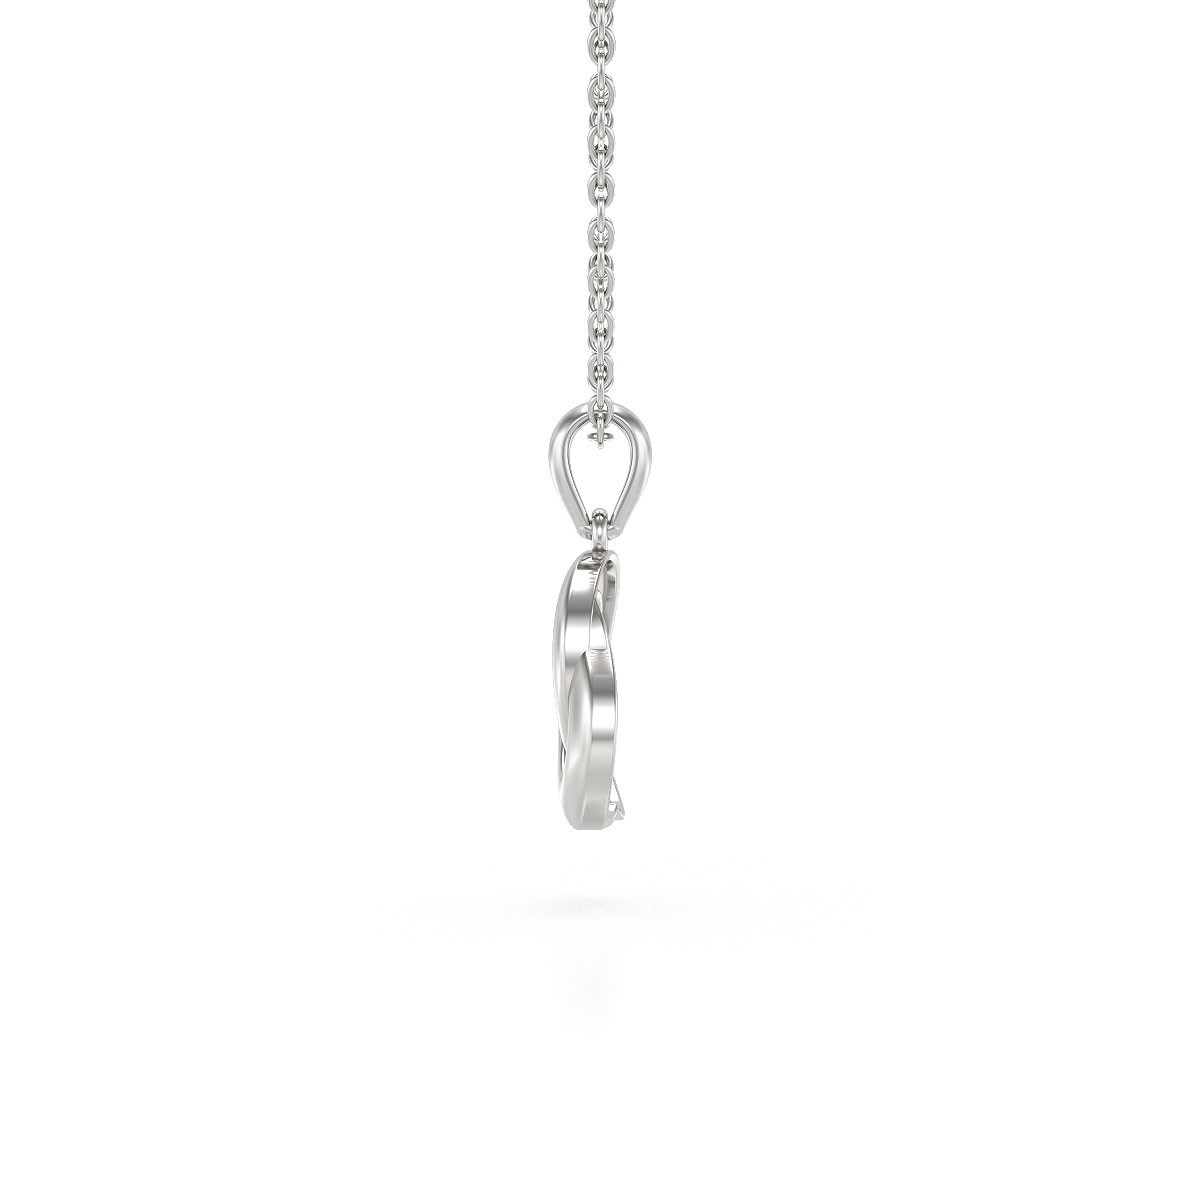 Collier Pendentif ADEN Or 585 Blanc Diamant Chaine Or 585 incluse 2.034grs - vue 4